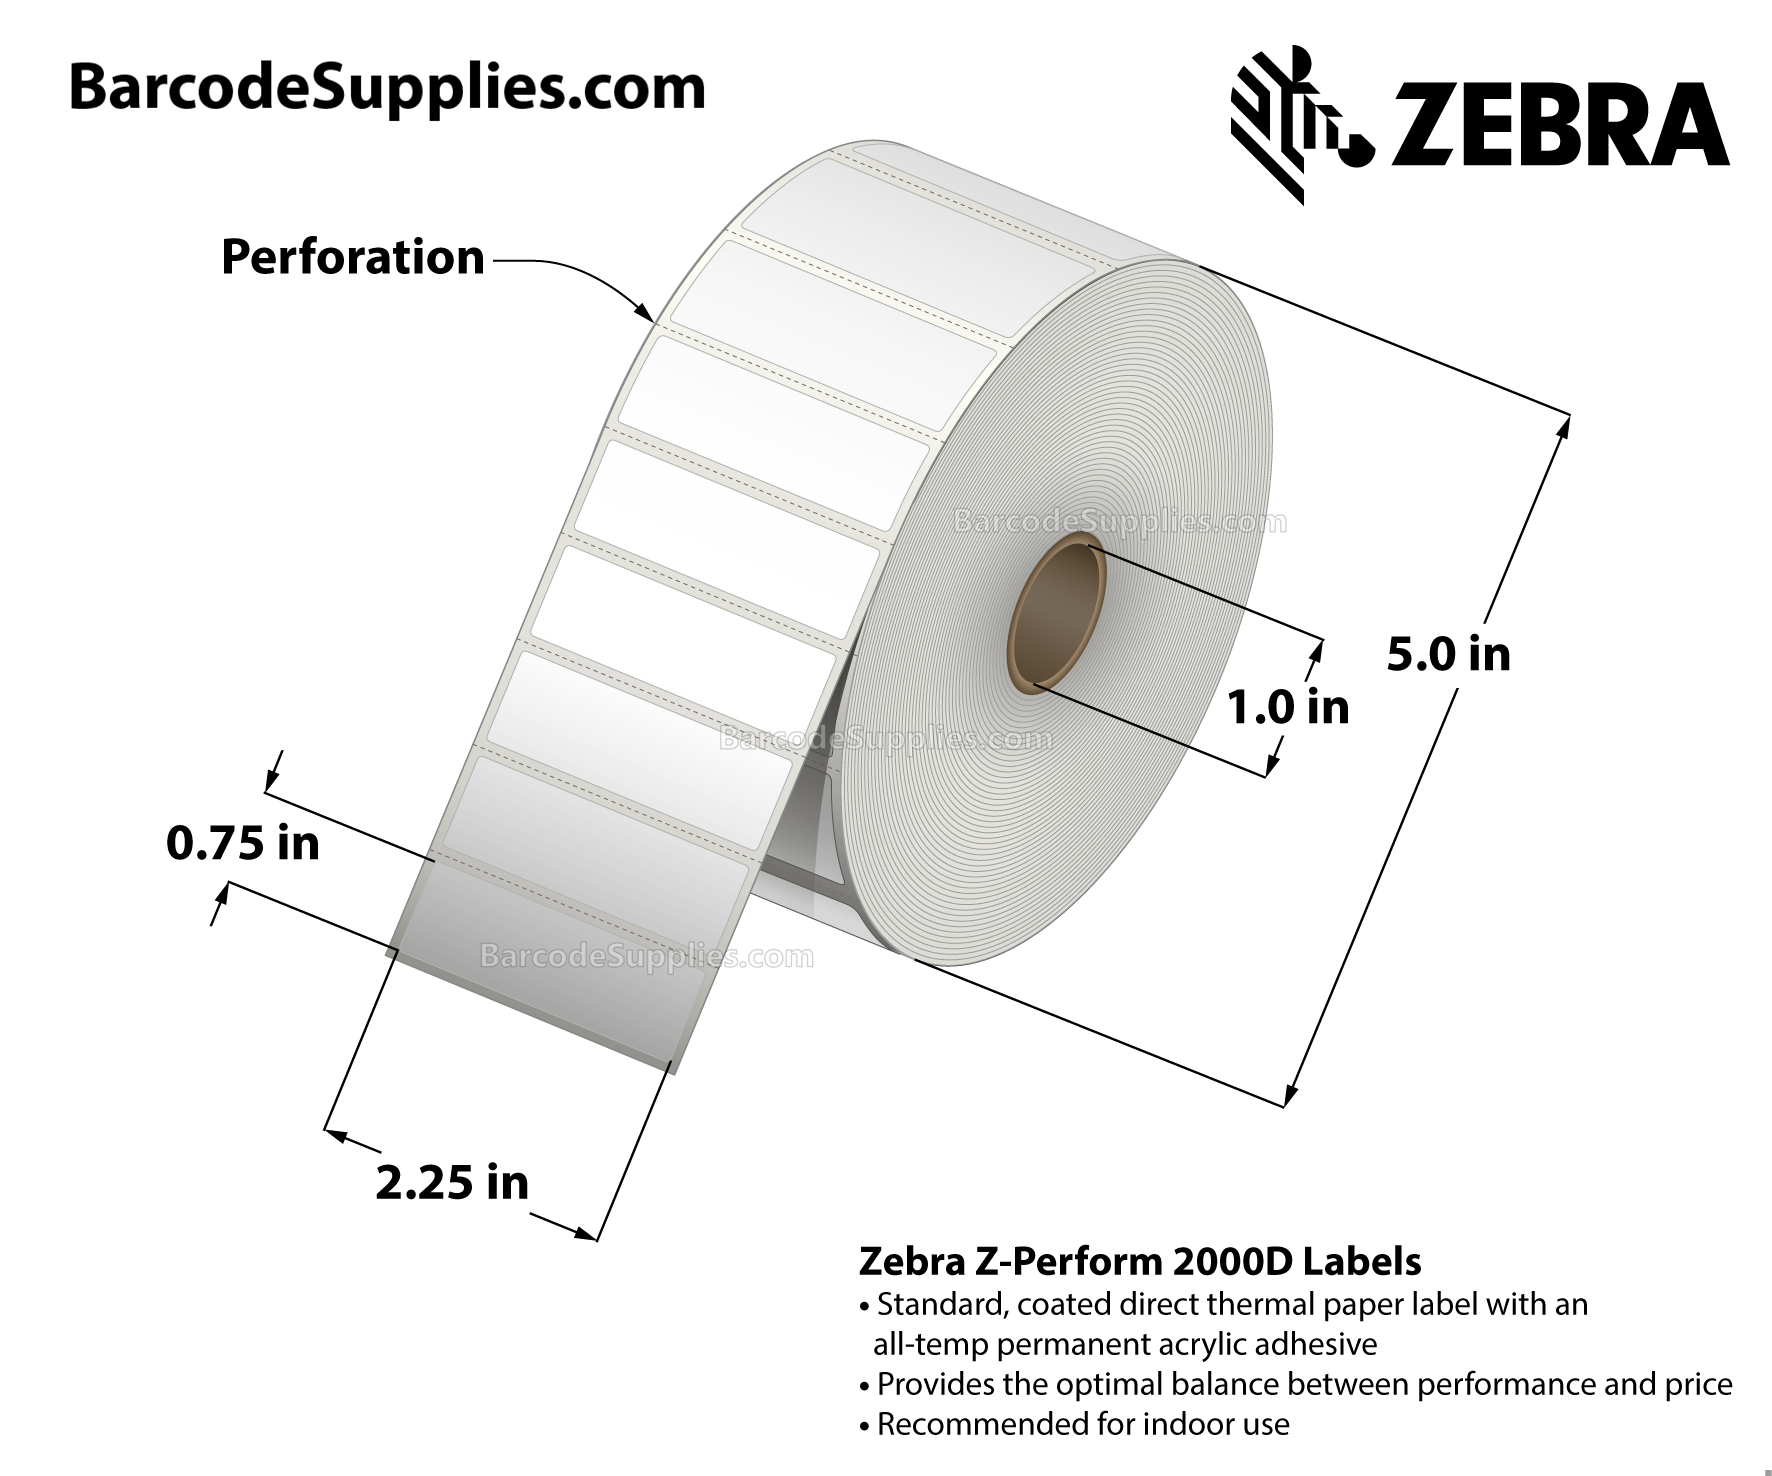 2.25 x 0.75 Direct Thermal White Z-Perform 2000D Labels With All-Temp Adhesive - Perforated - 3315 Labels Per Roll - Carton Of 12 Rolls - 39780 Labels Total - MPN: 10015785